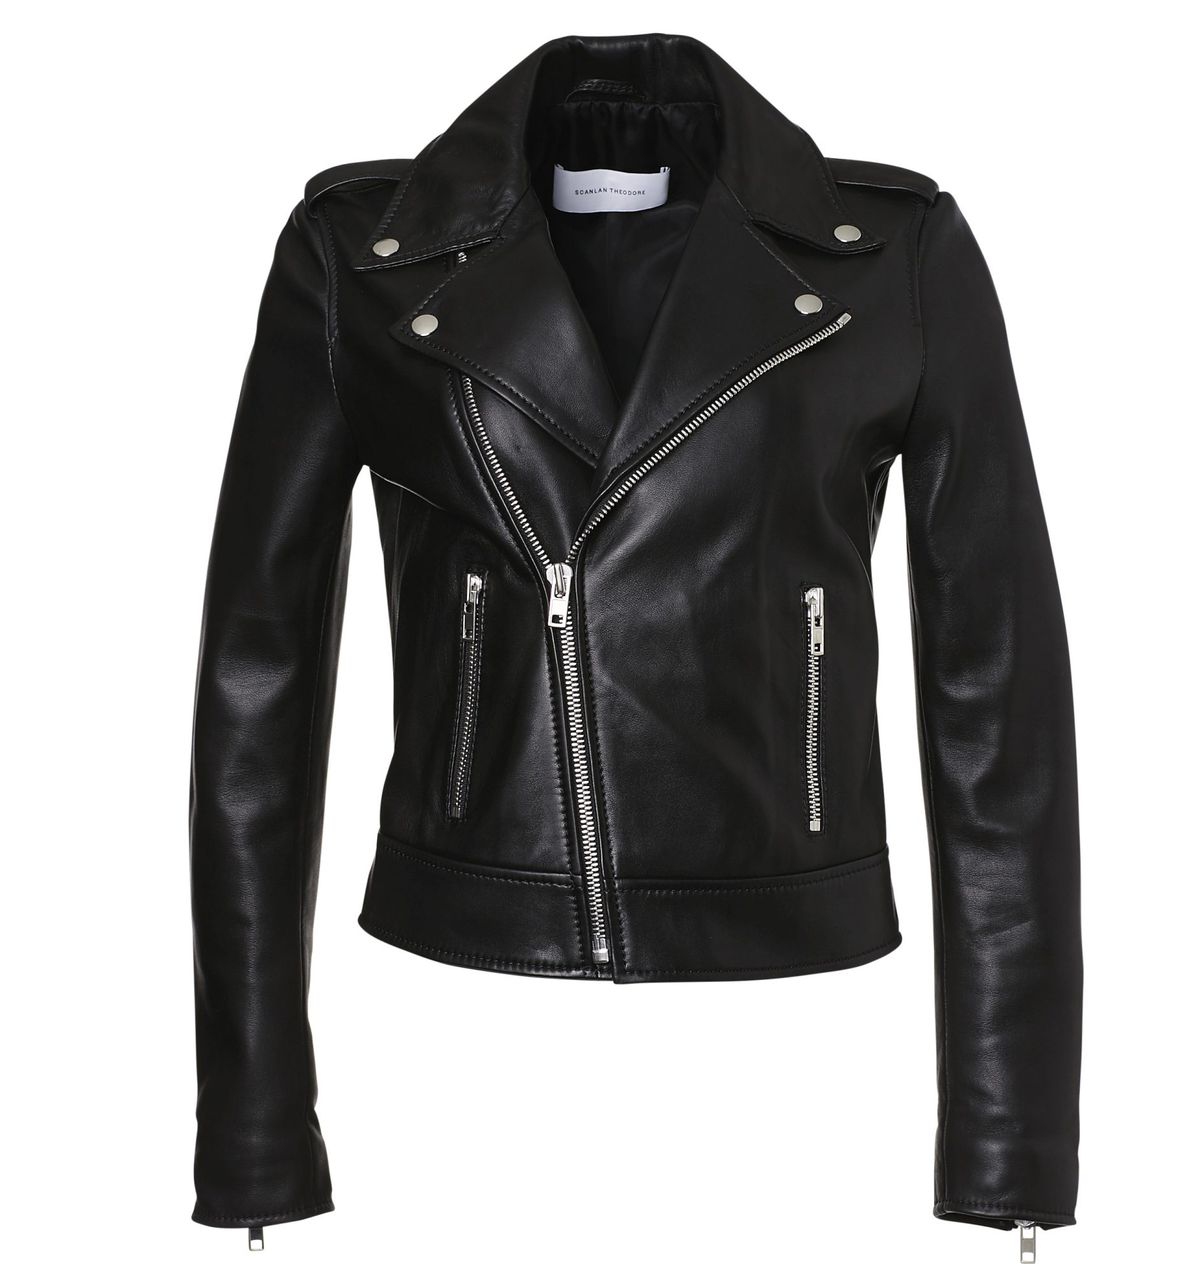 the perfect leather jacket for layering by Scanlan Theodore